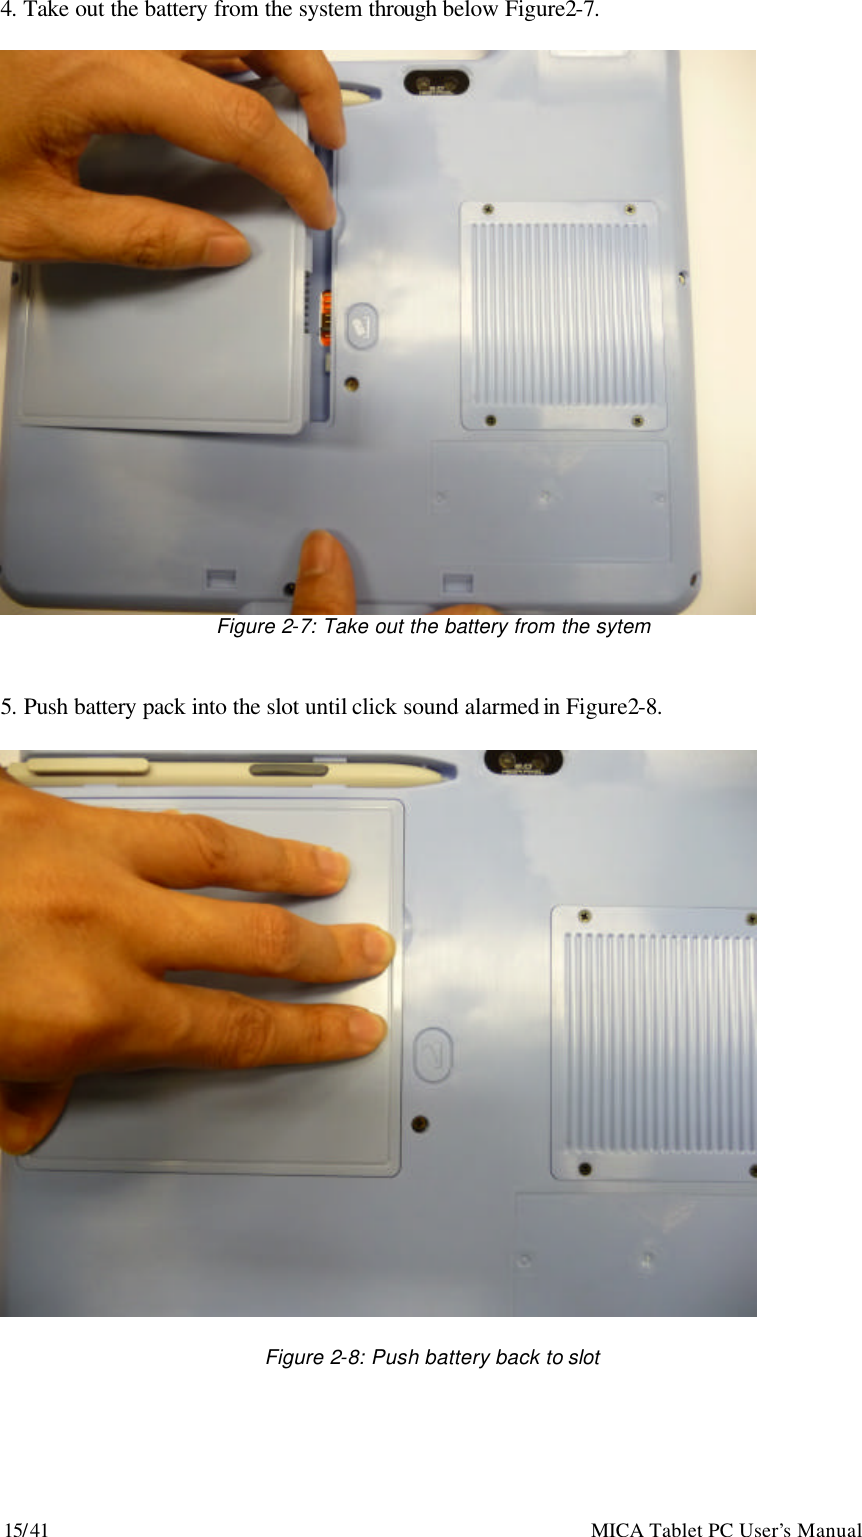 15/41                                                    MICA Tablet PC User’s Manual 4. Take out the battery from the system through below Figure2-7.   Figure 2-7: Take out the battery from the sytem   5. Push battery pack into the slot until click sound alarmed in Figure2-8.    Figure 2-8: Push battery back to slot 